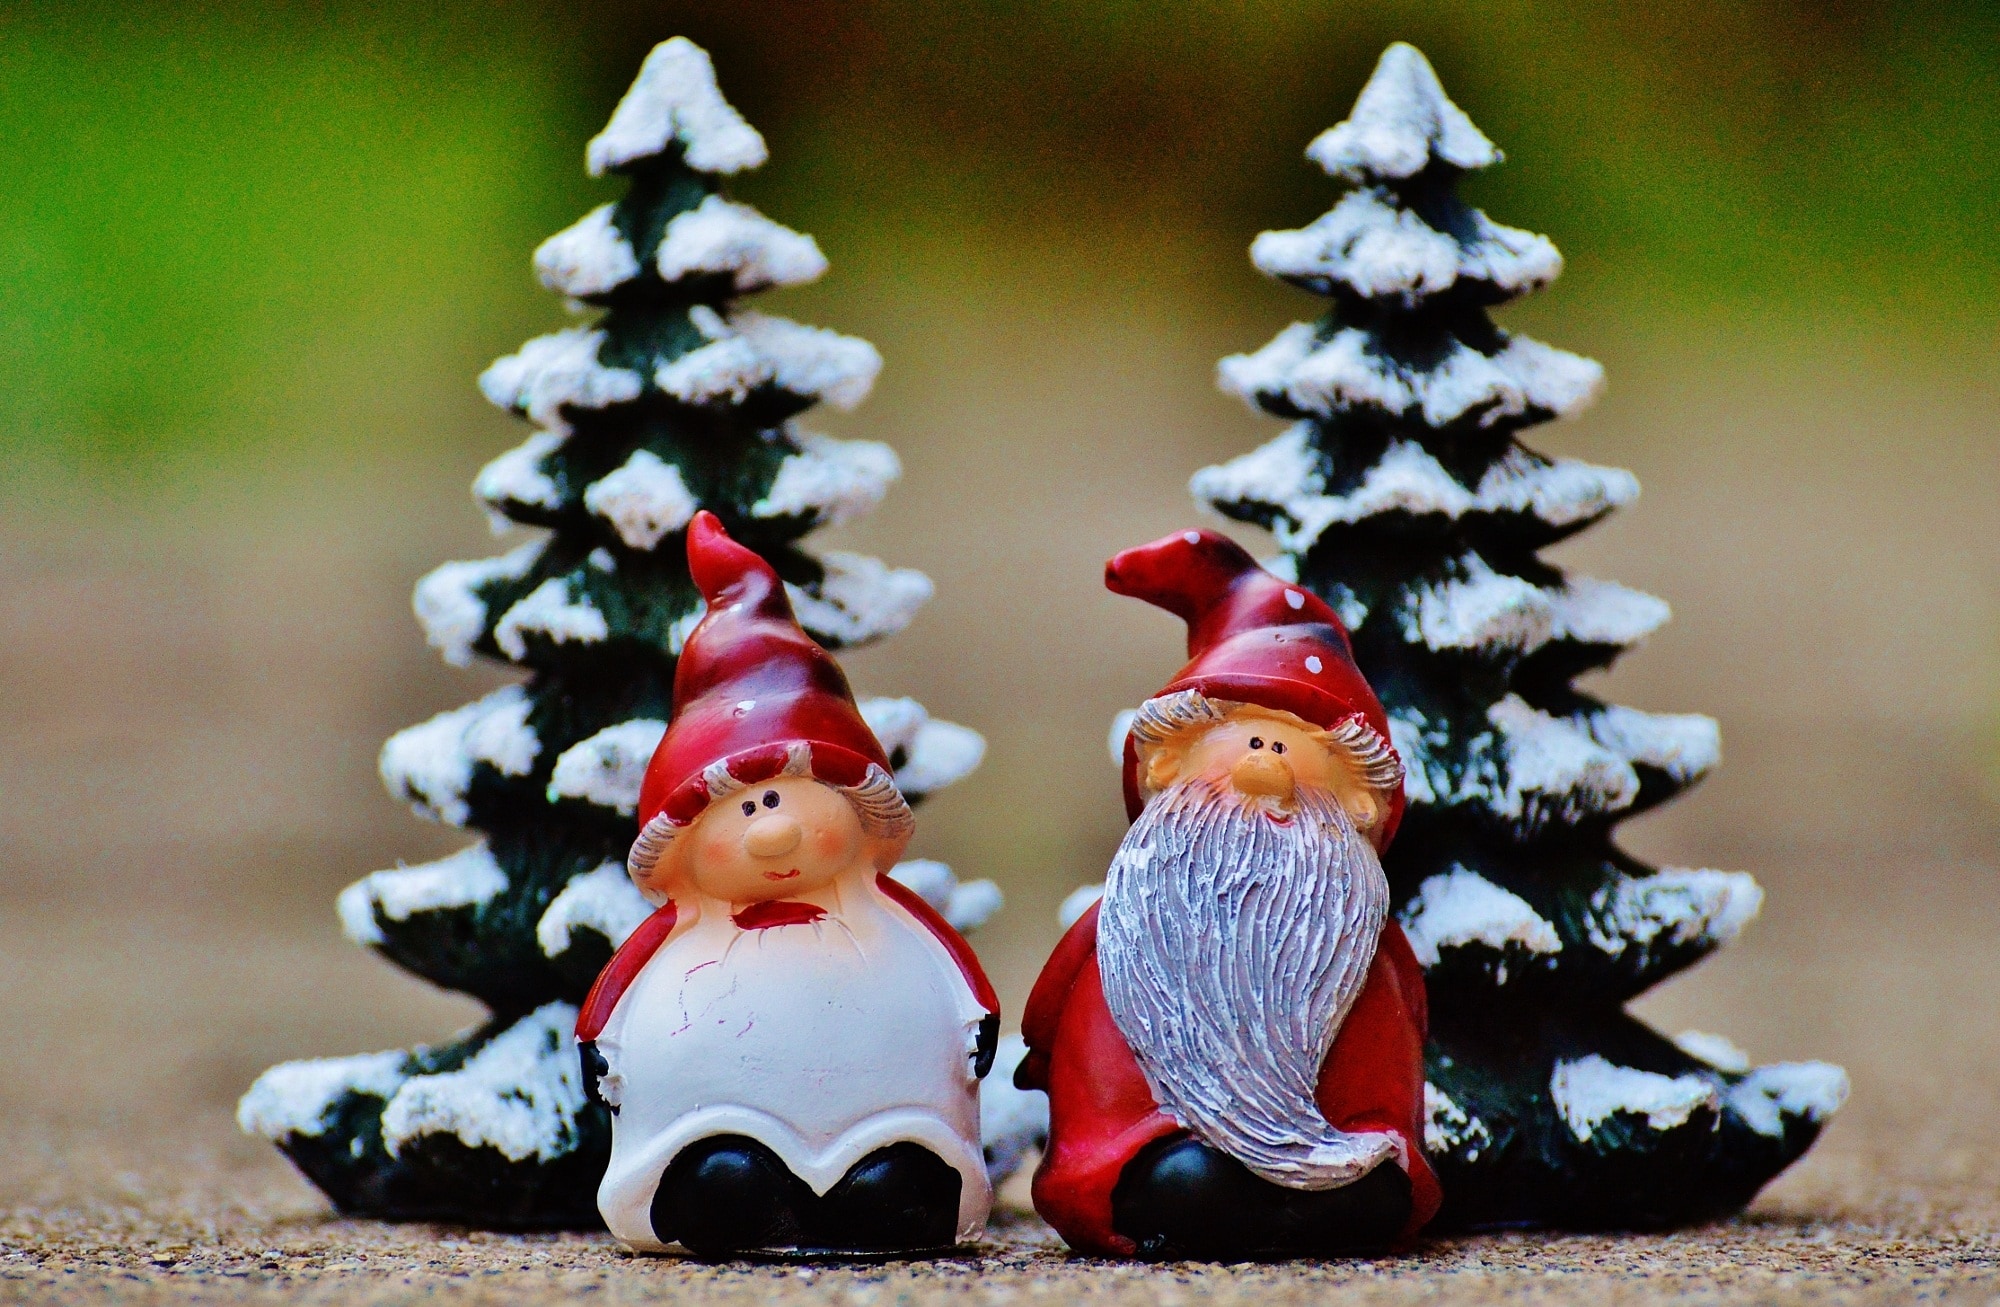 mr. and mrs. clause figurines